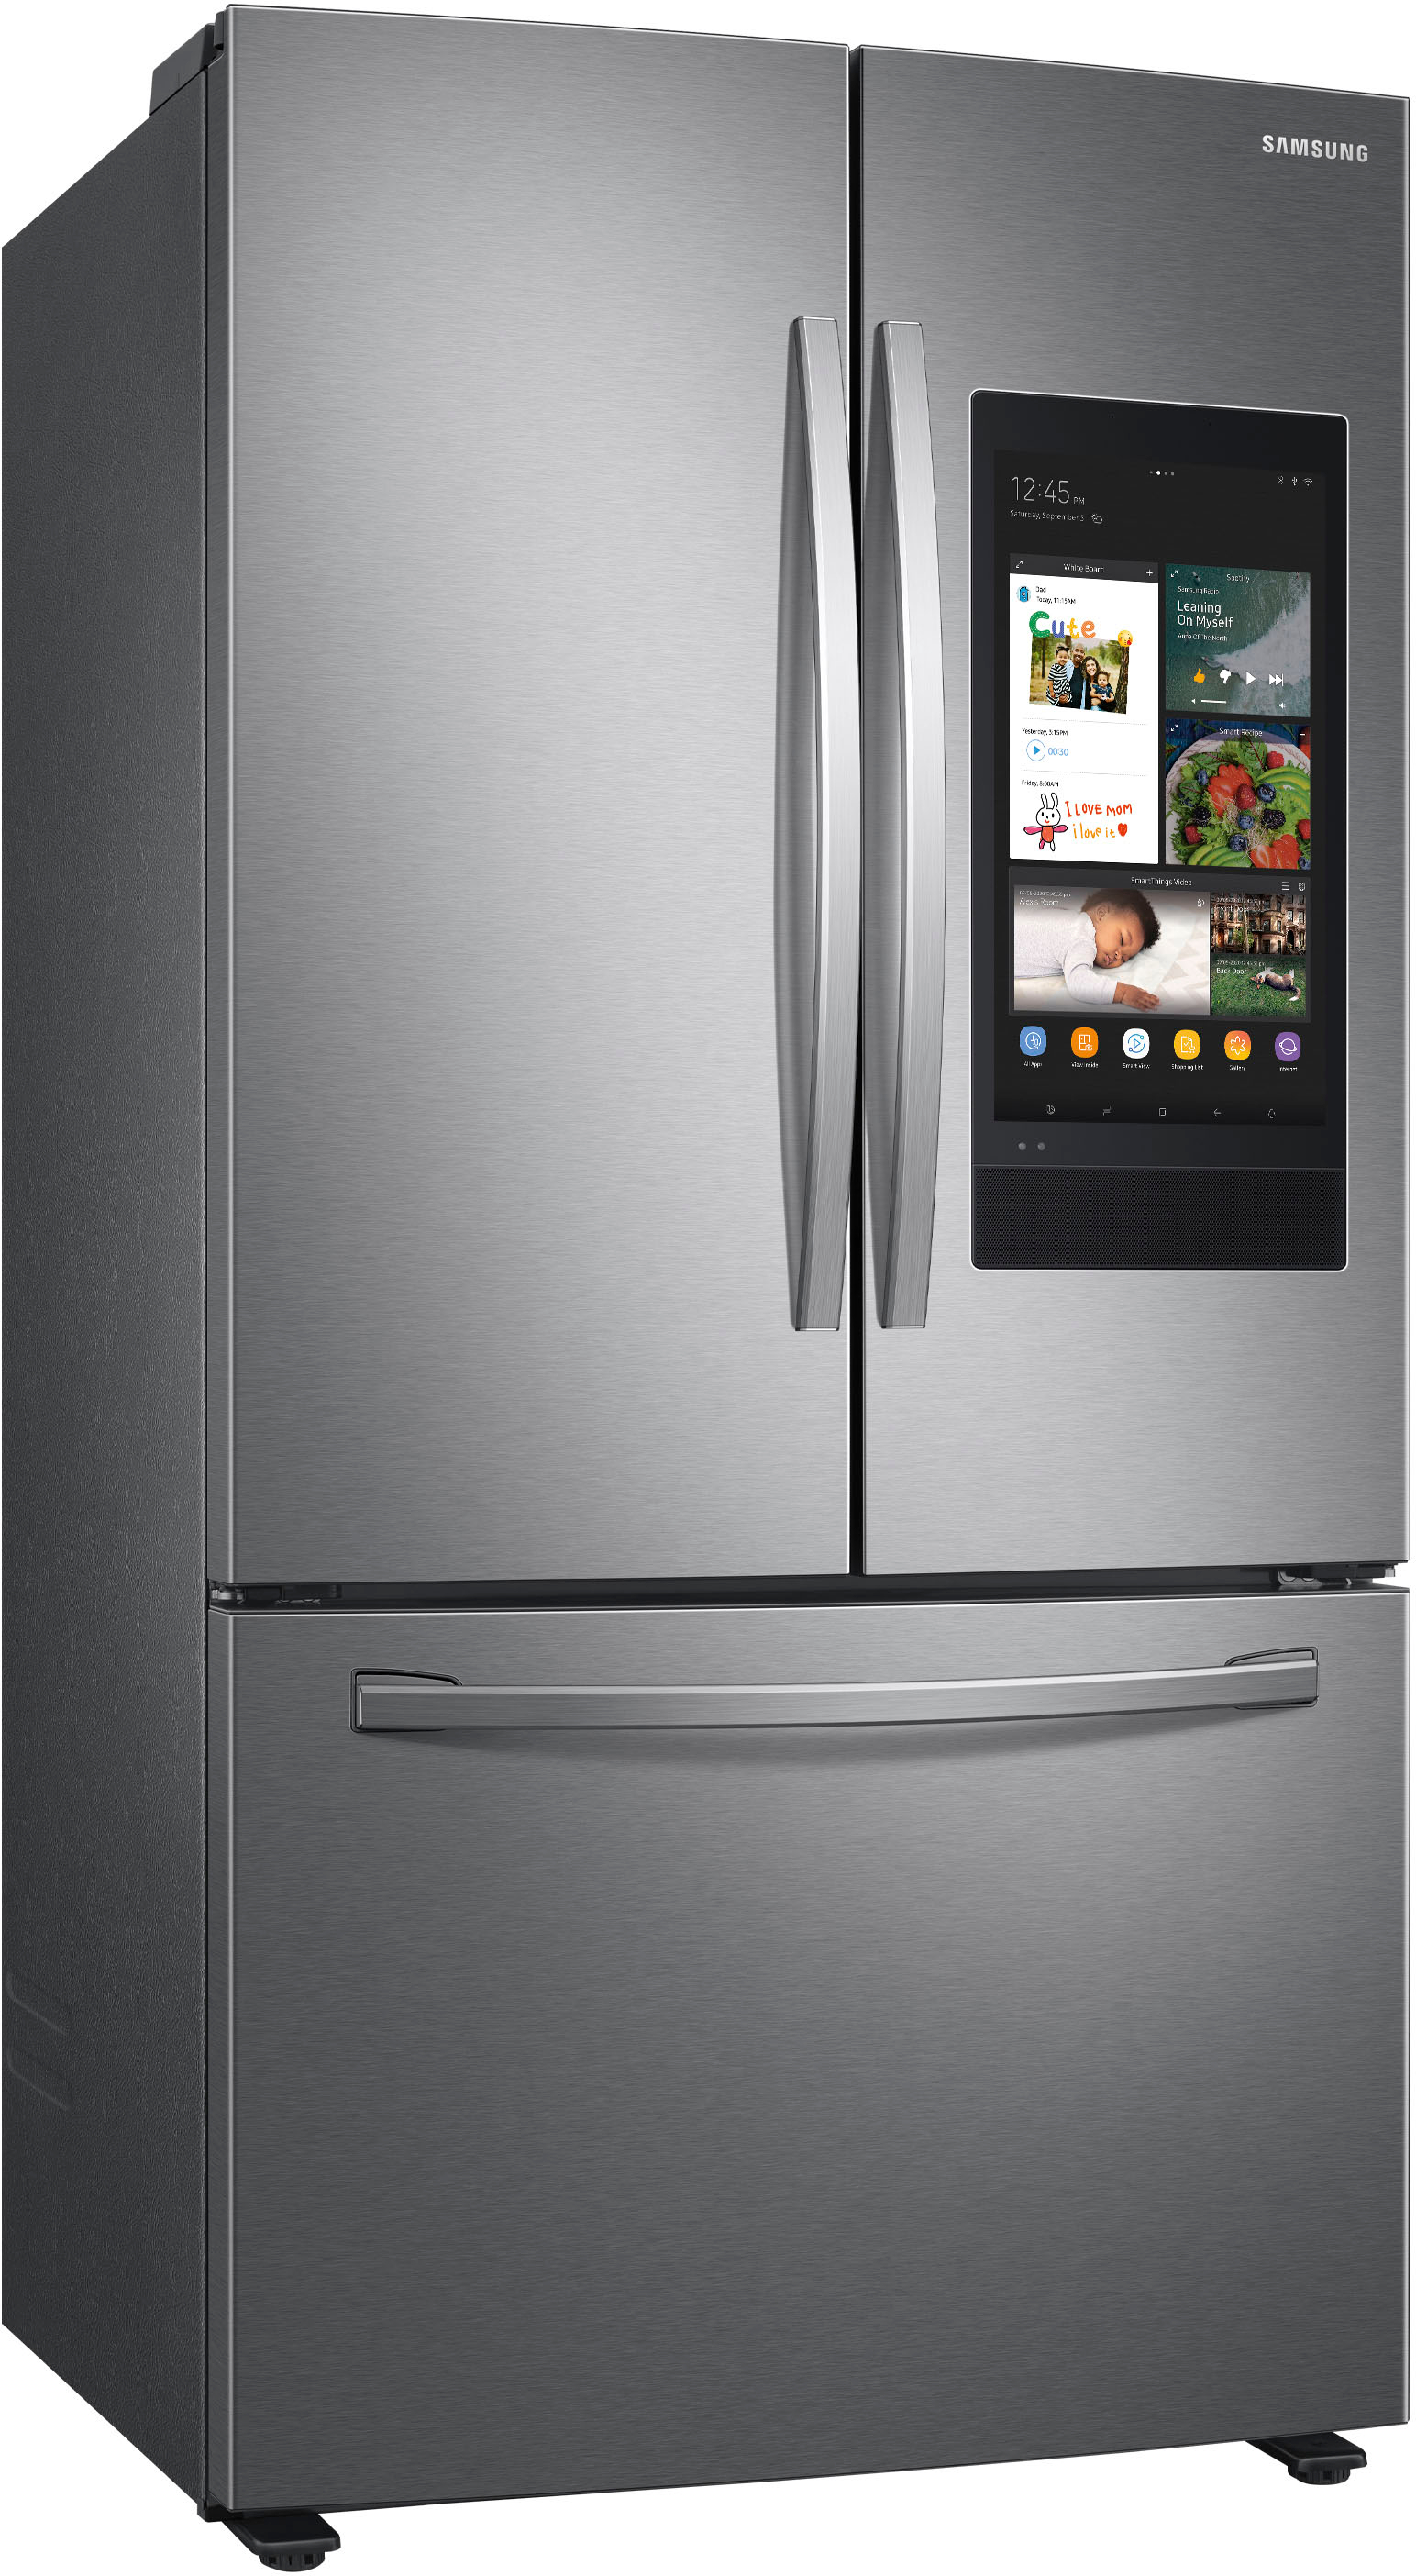 Angle View: Samsung - 29 cu. ft. Bespoke 4-Door French Door Refrigerator with Family Hub - Charcoal